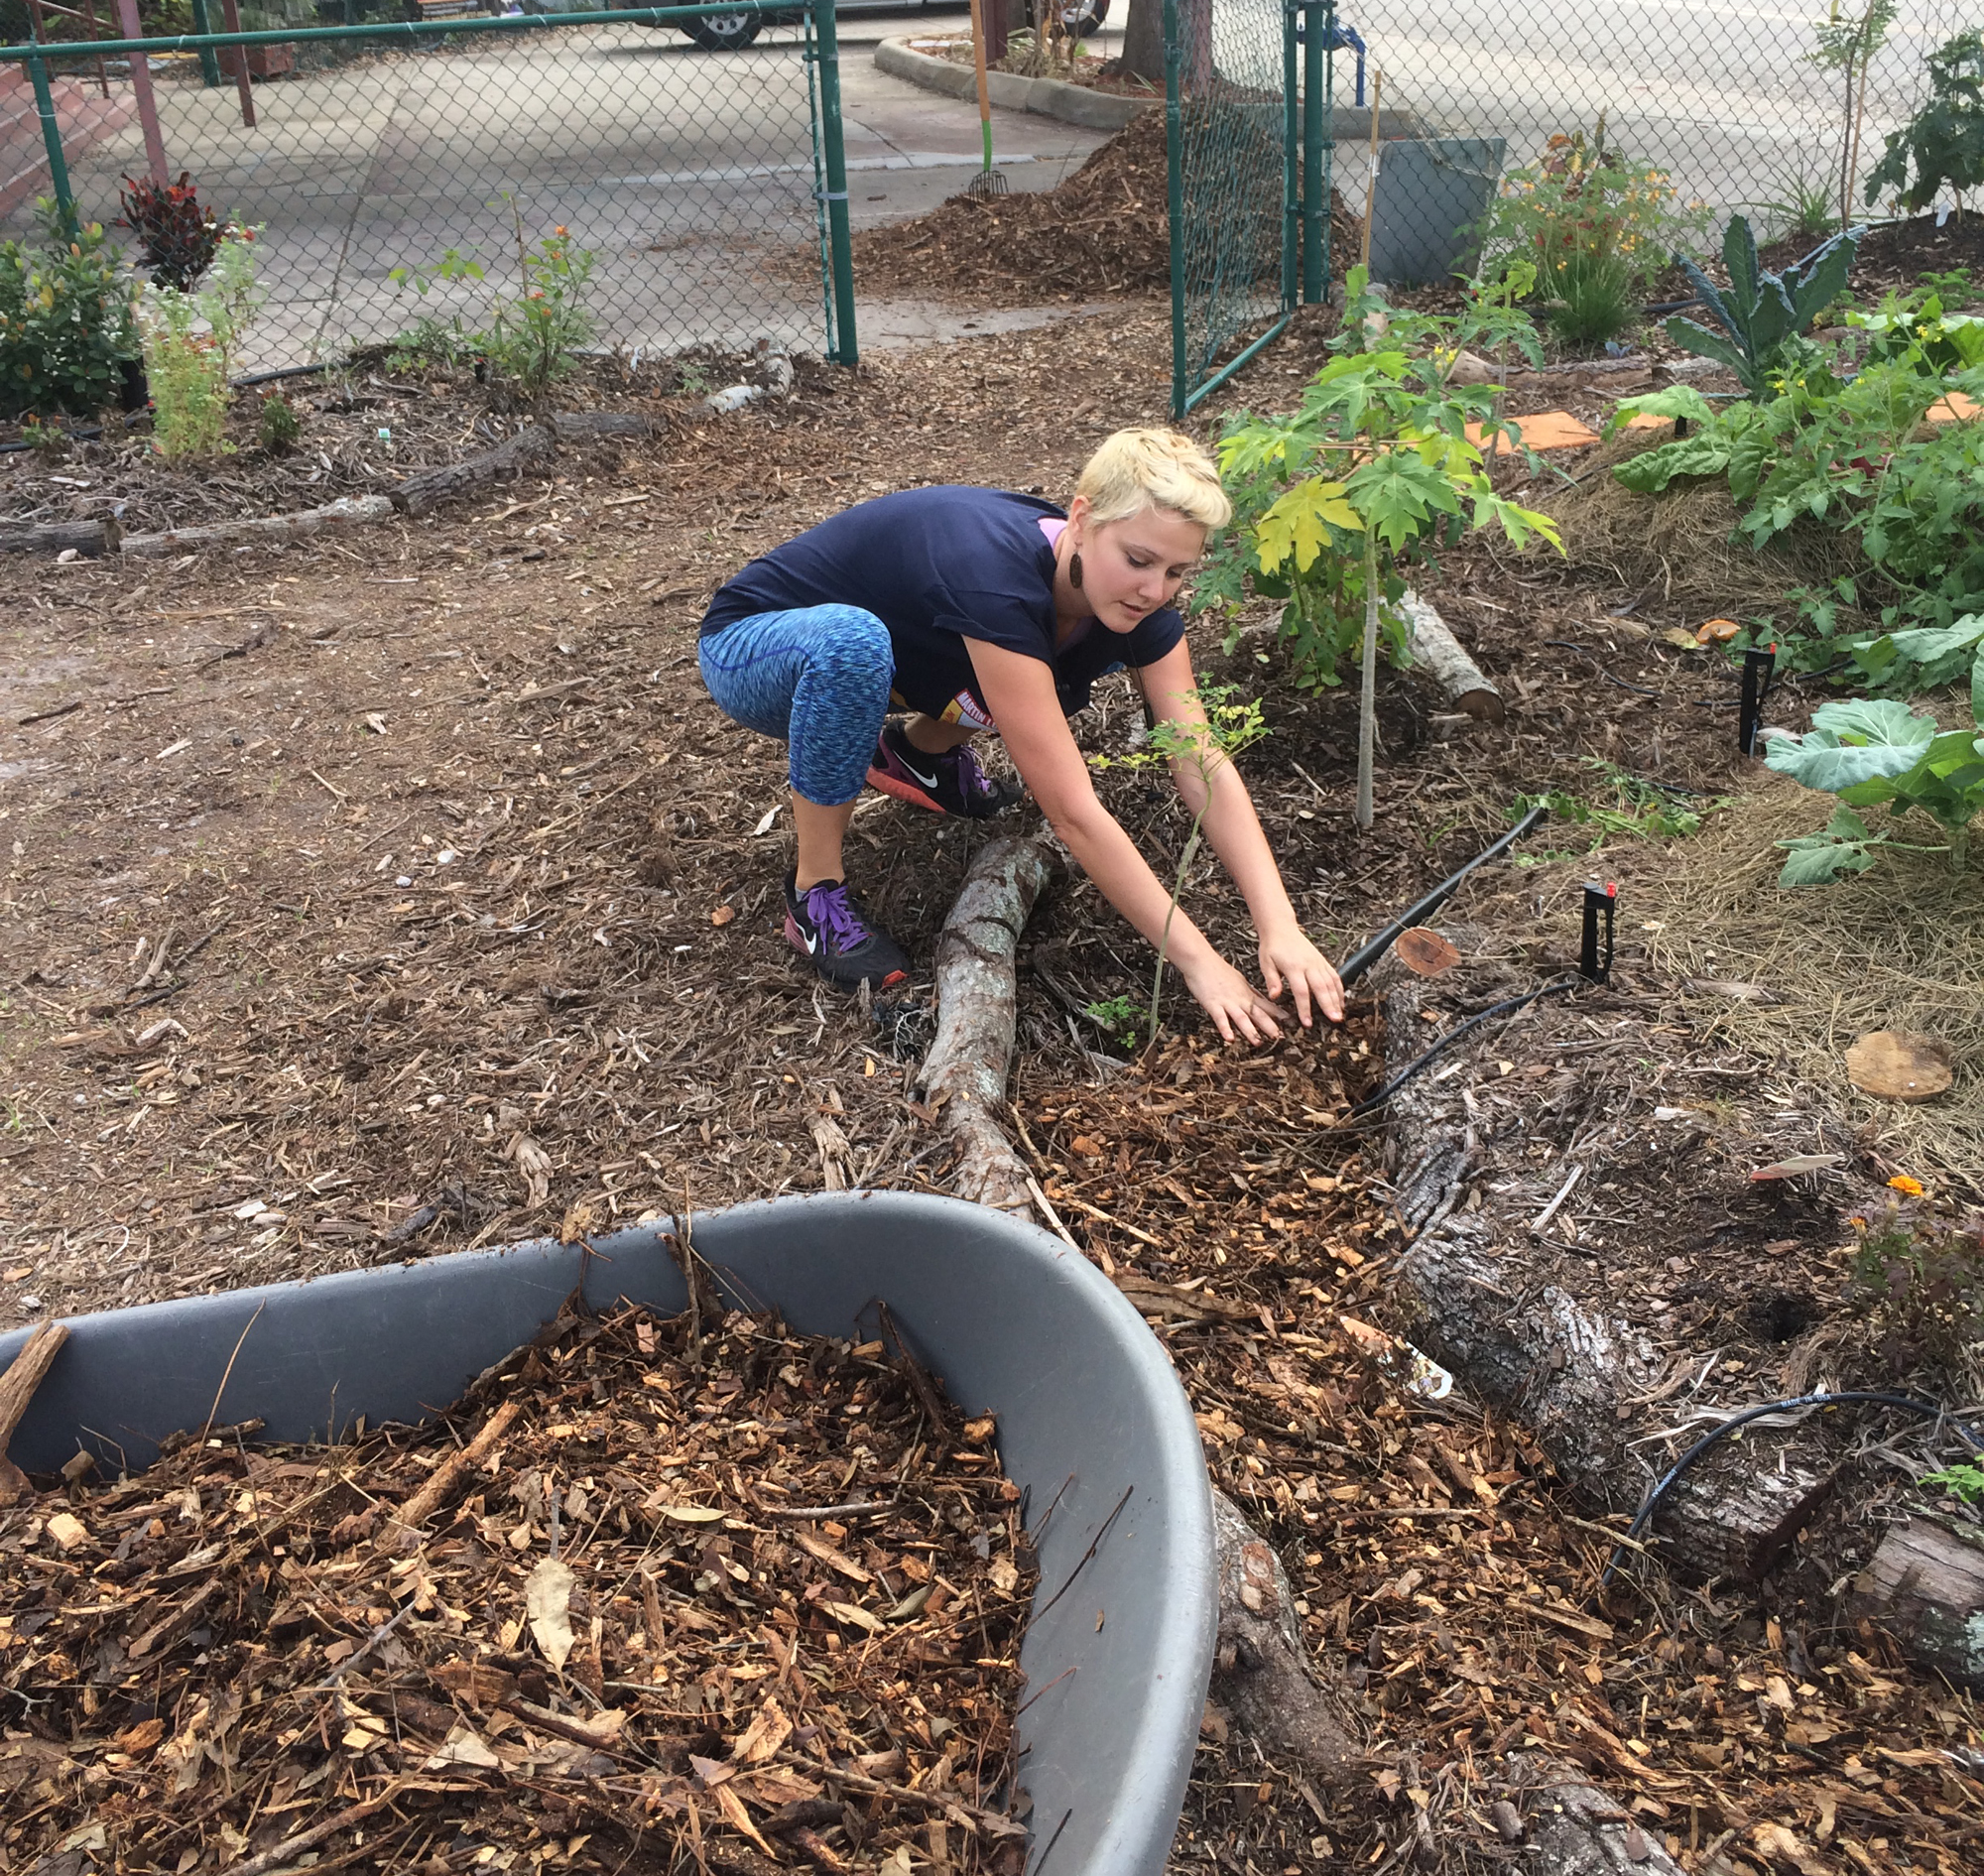 Contributor Nicole spreading mulch over the newly installed seamless irrigation lines that now drench the garden in reclaimed rainwater.